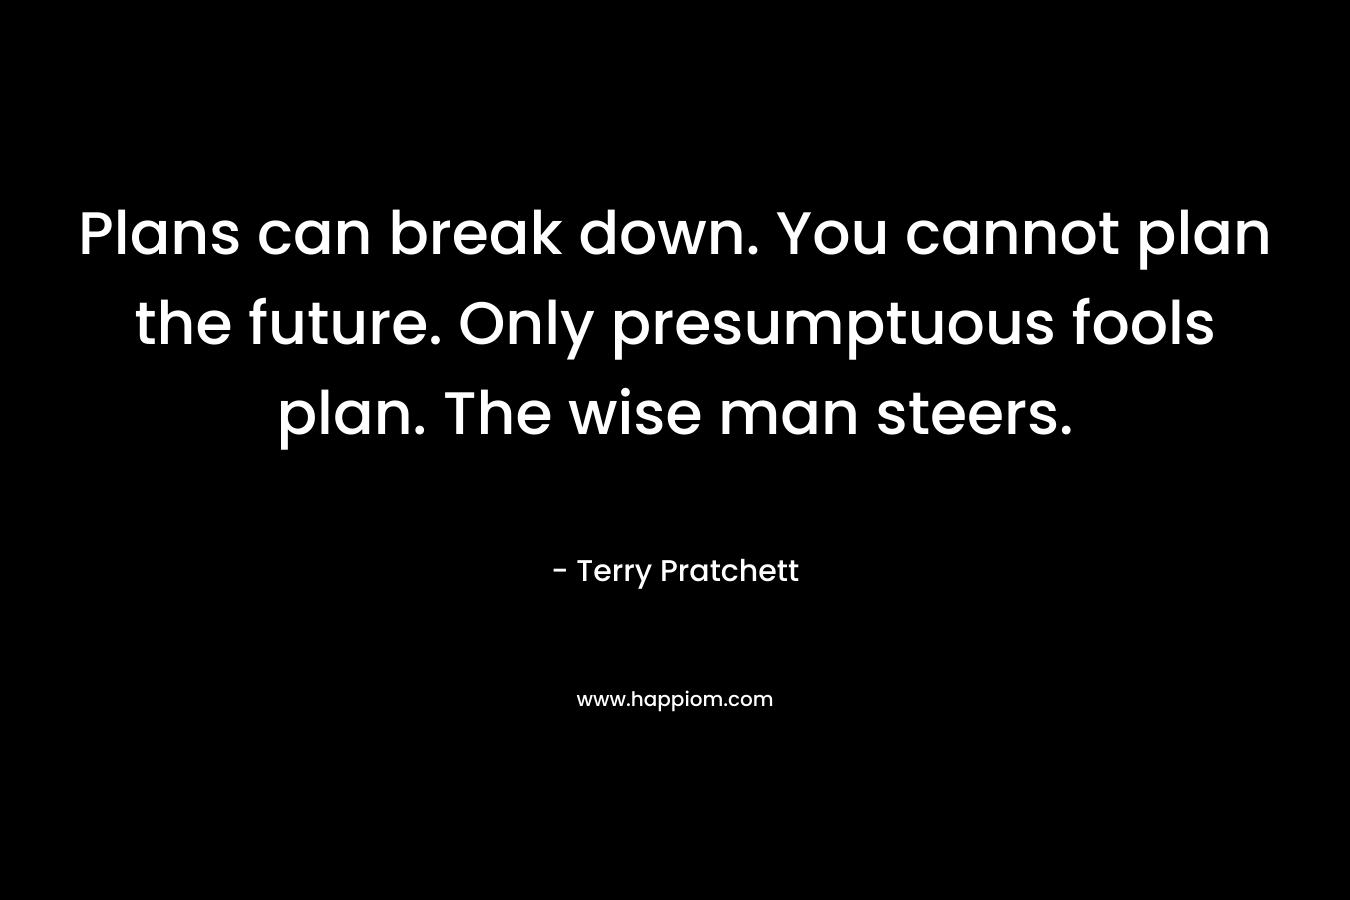 Plans can break down. You cannot plan the future. Only presumptuous fools plan. The wise man steers.